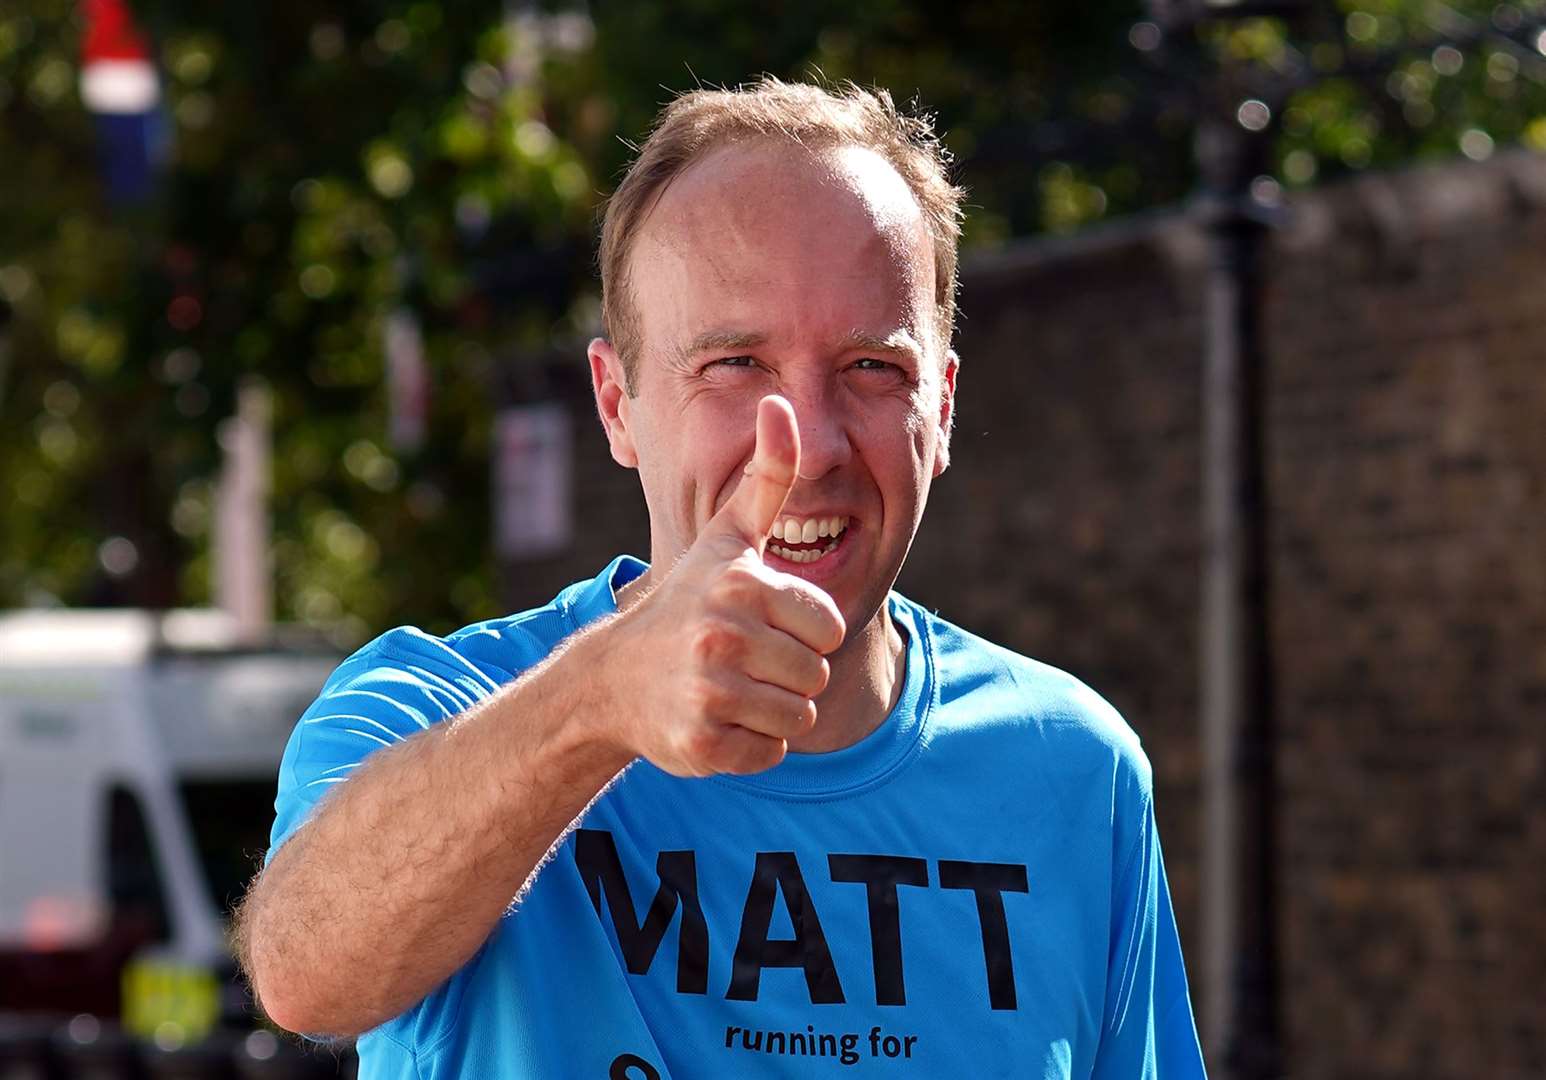 Matt Hancock’s appearance on I’m A Celebrity… Get Me Out Of Here! cost him the Conservative whip in November 2022 (Yui Mok/PA)